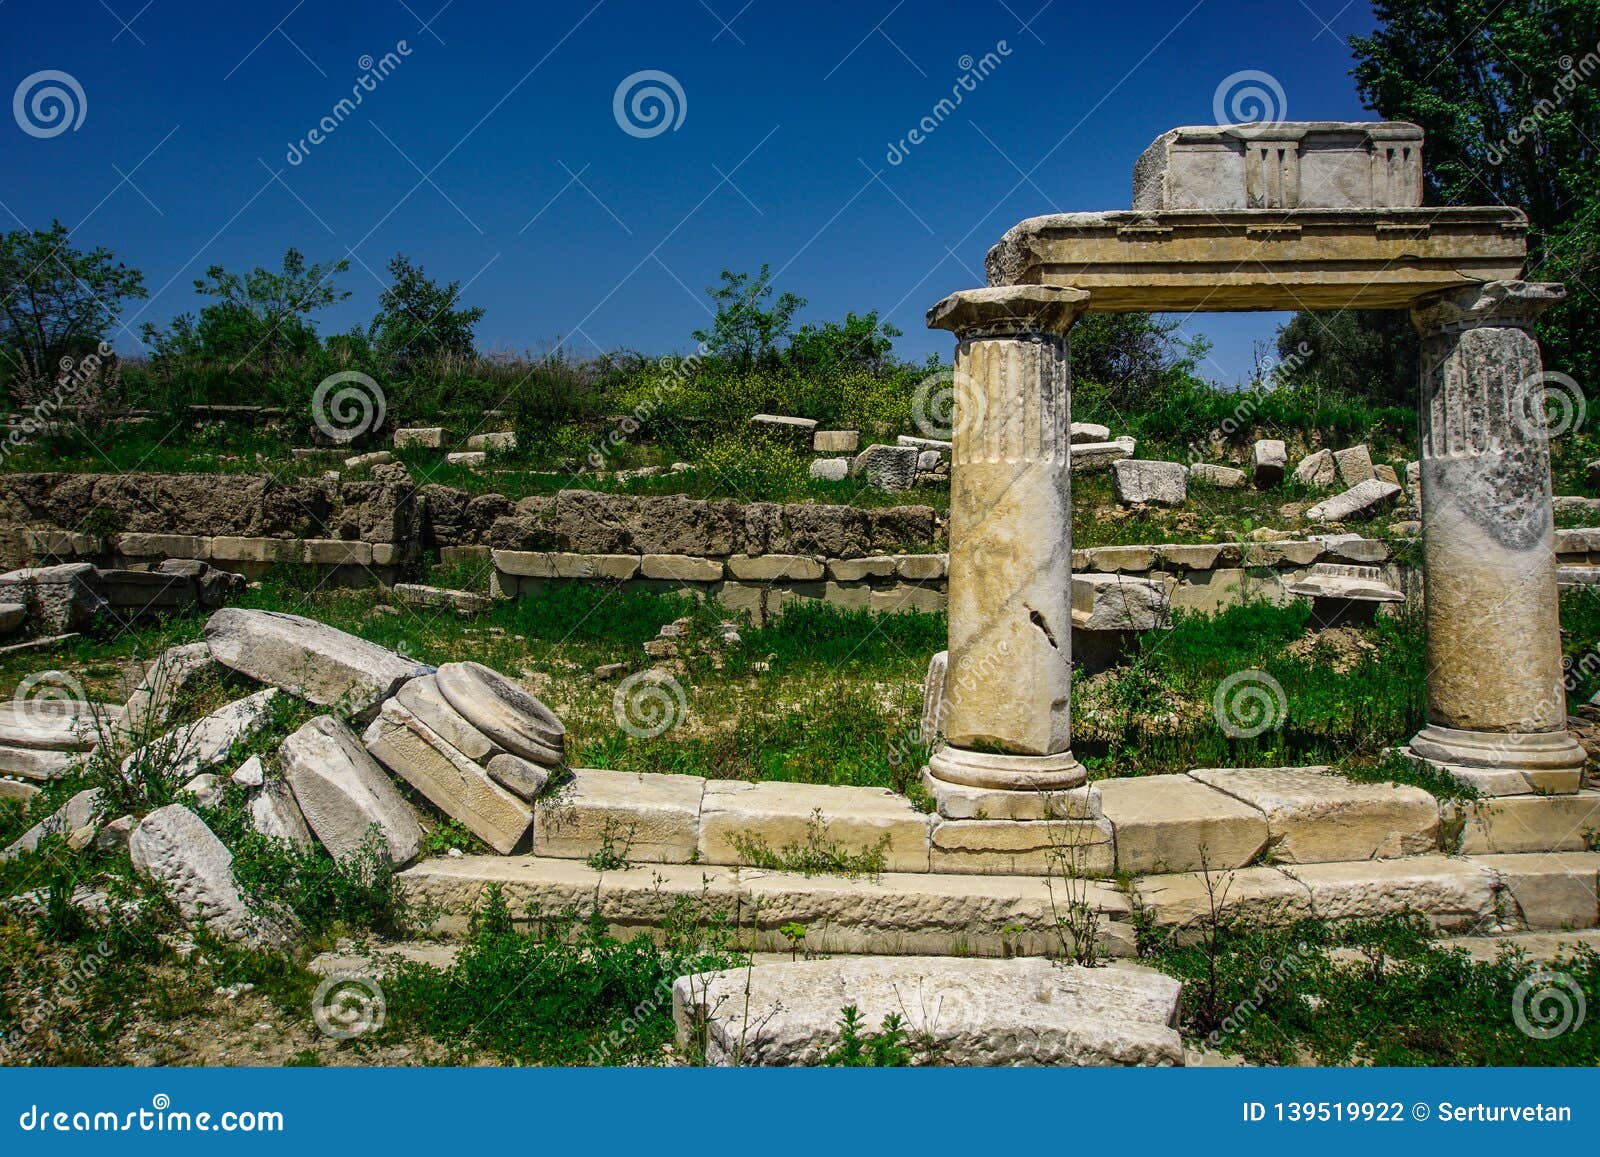 lagina hecate hekate ancient city in mugla, turkey